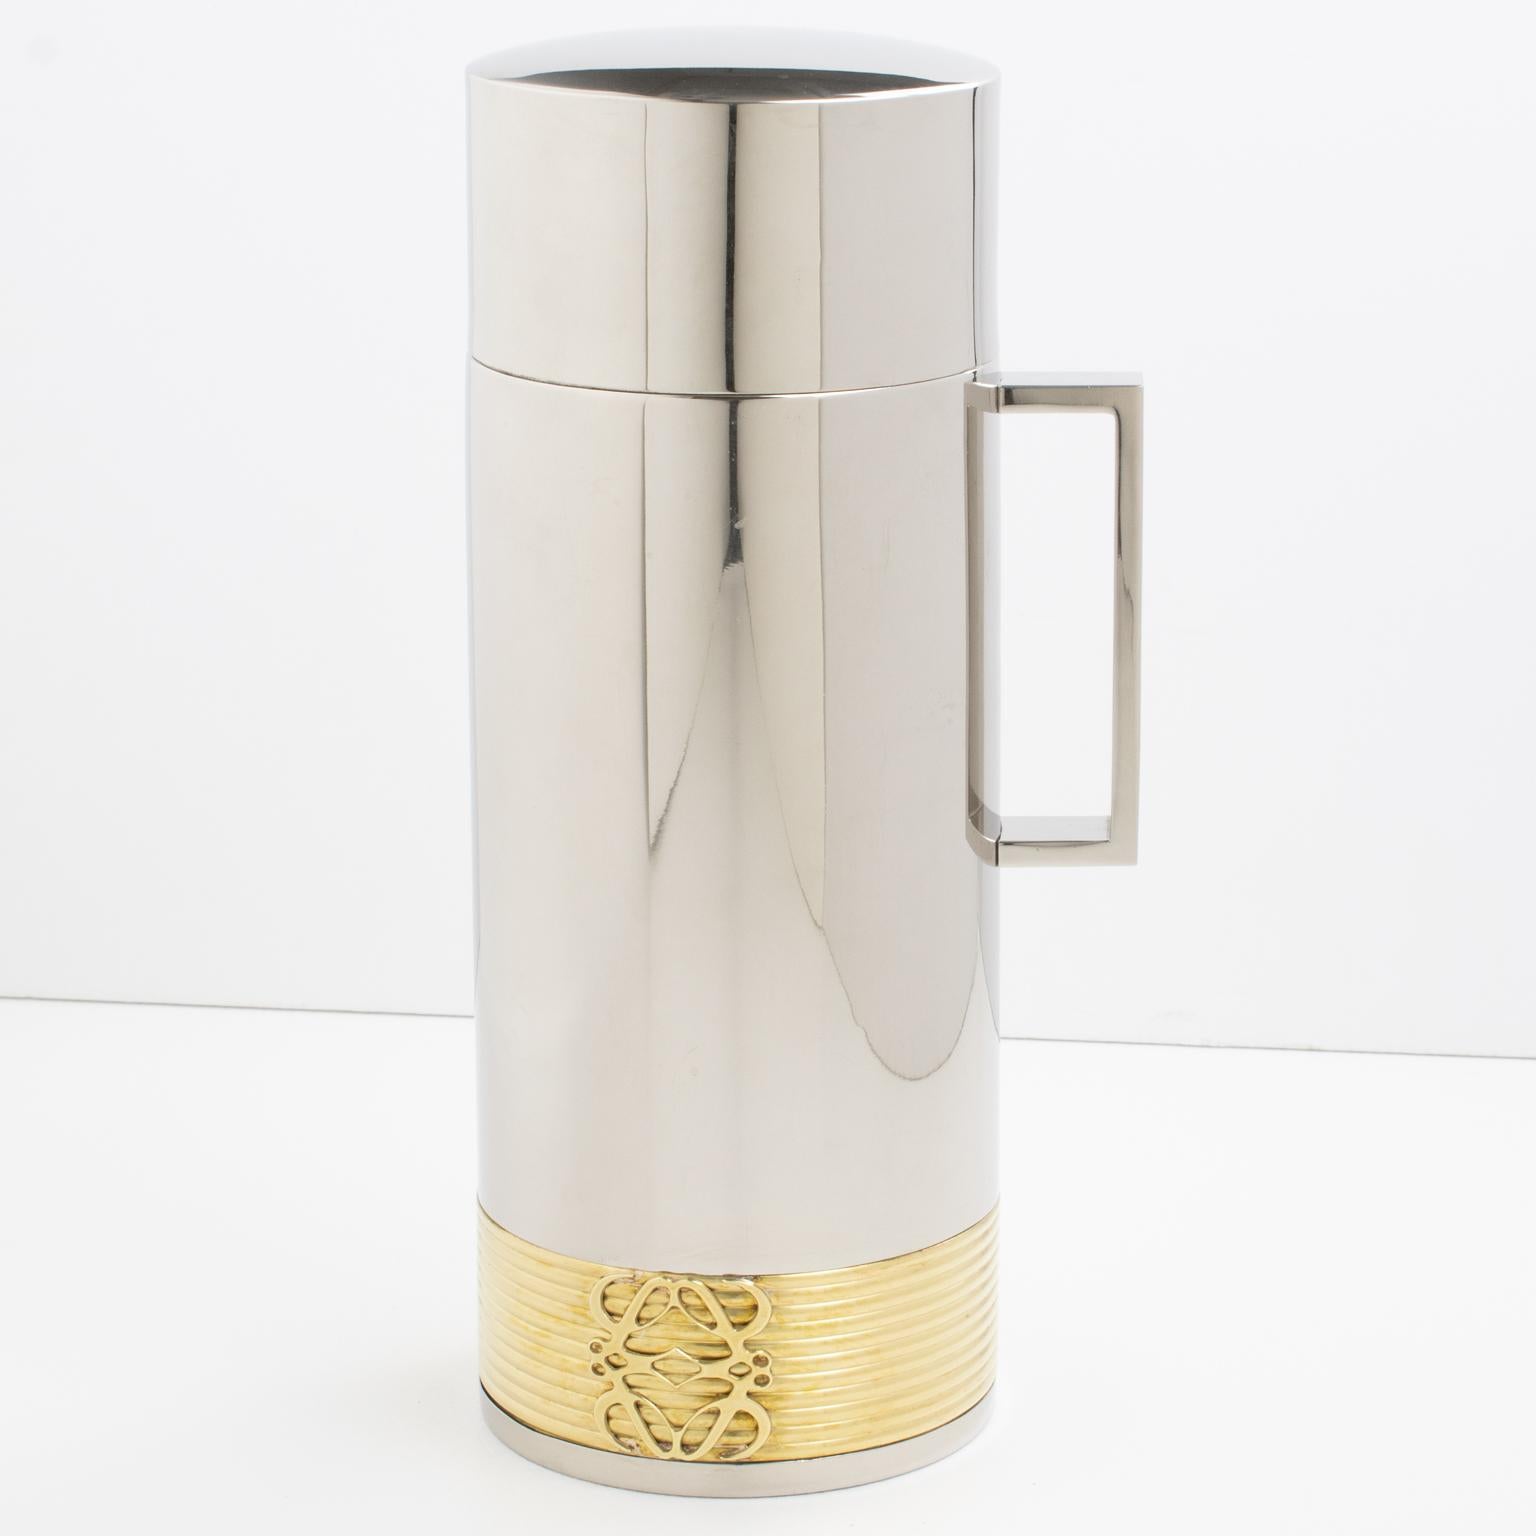 This is a sleek and modernist barware thermos made of chrome and gilded brass, produced by Loewe in Spain. The insulated decanter features a large flat handle and a dimensional striped design with a gilded brass Loewe logo decor. The inner thermos